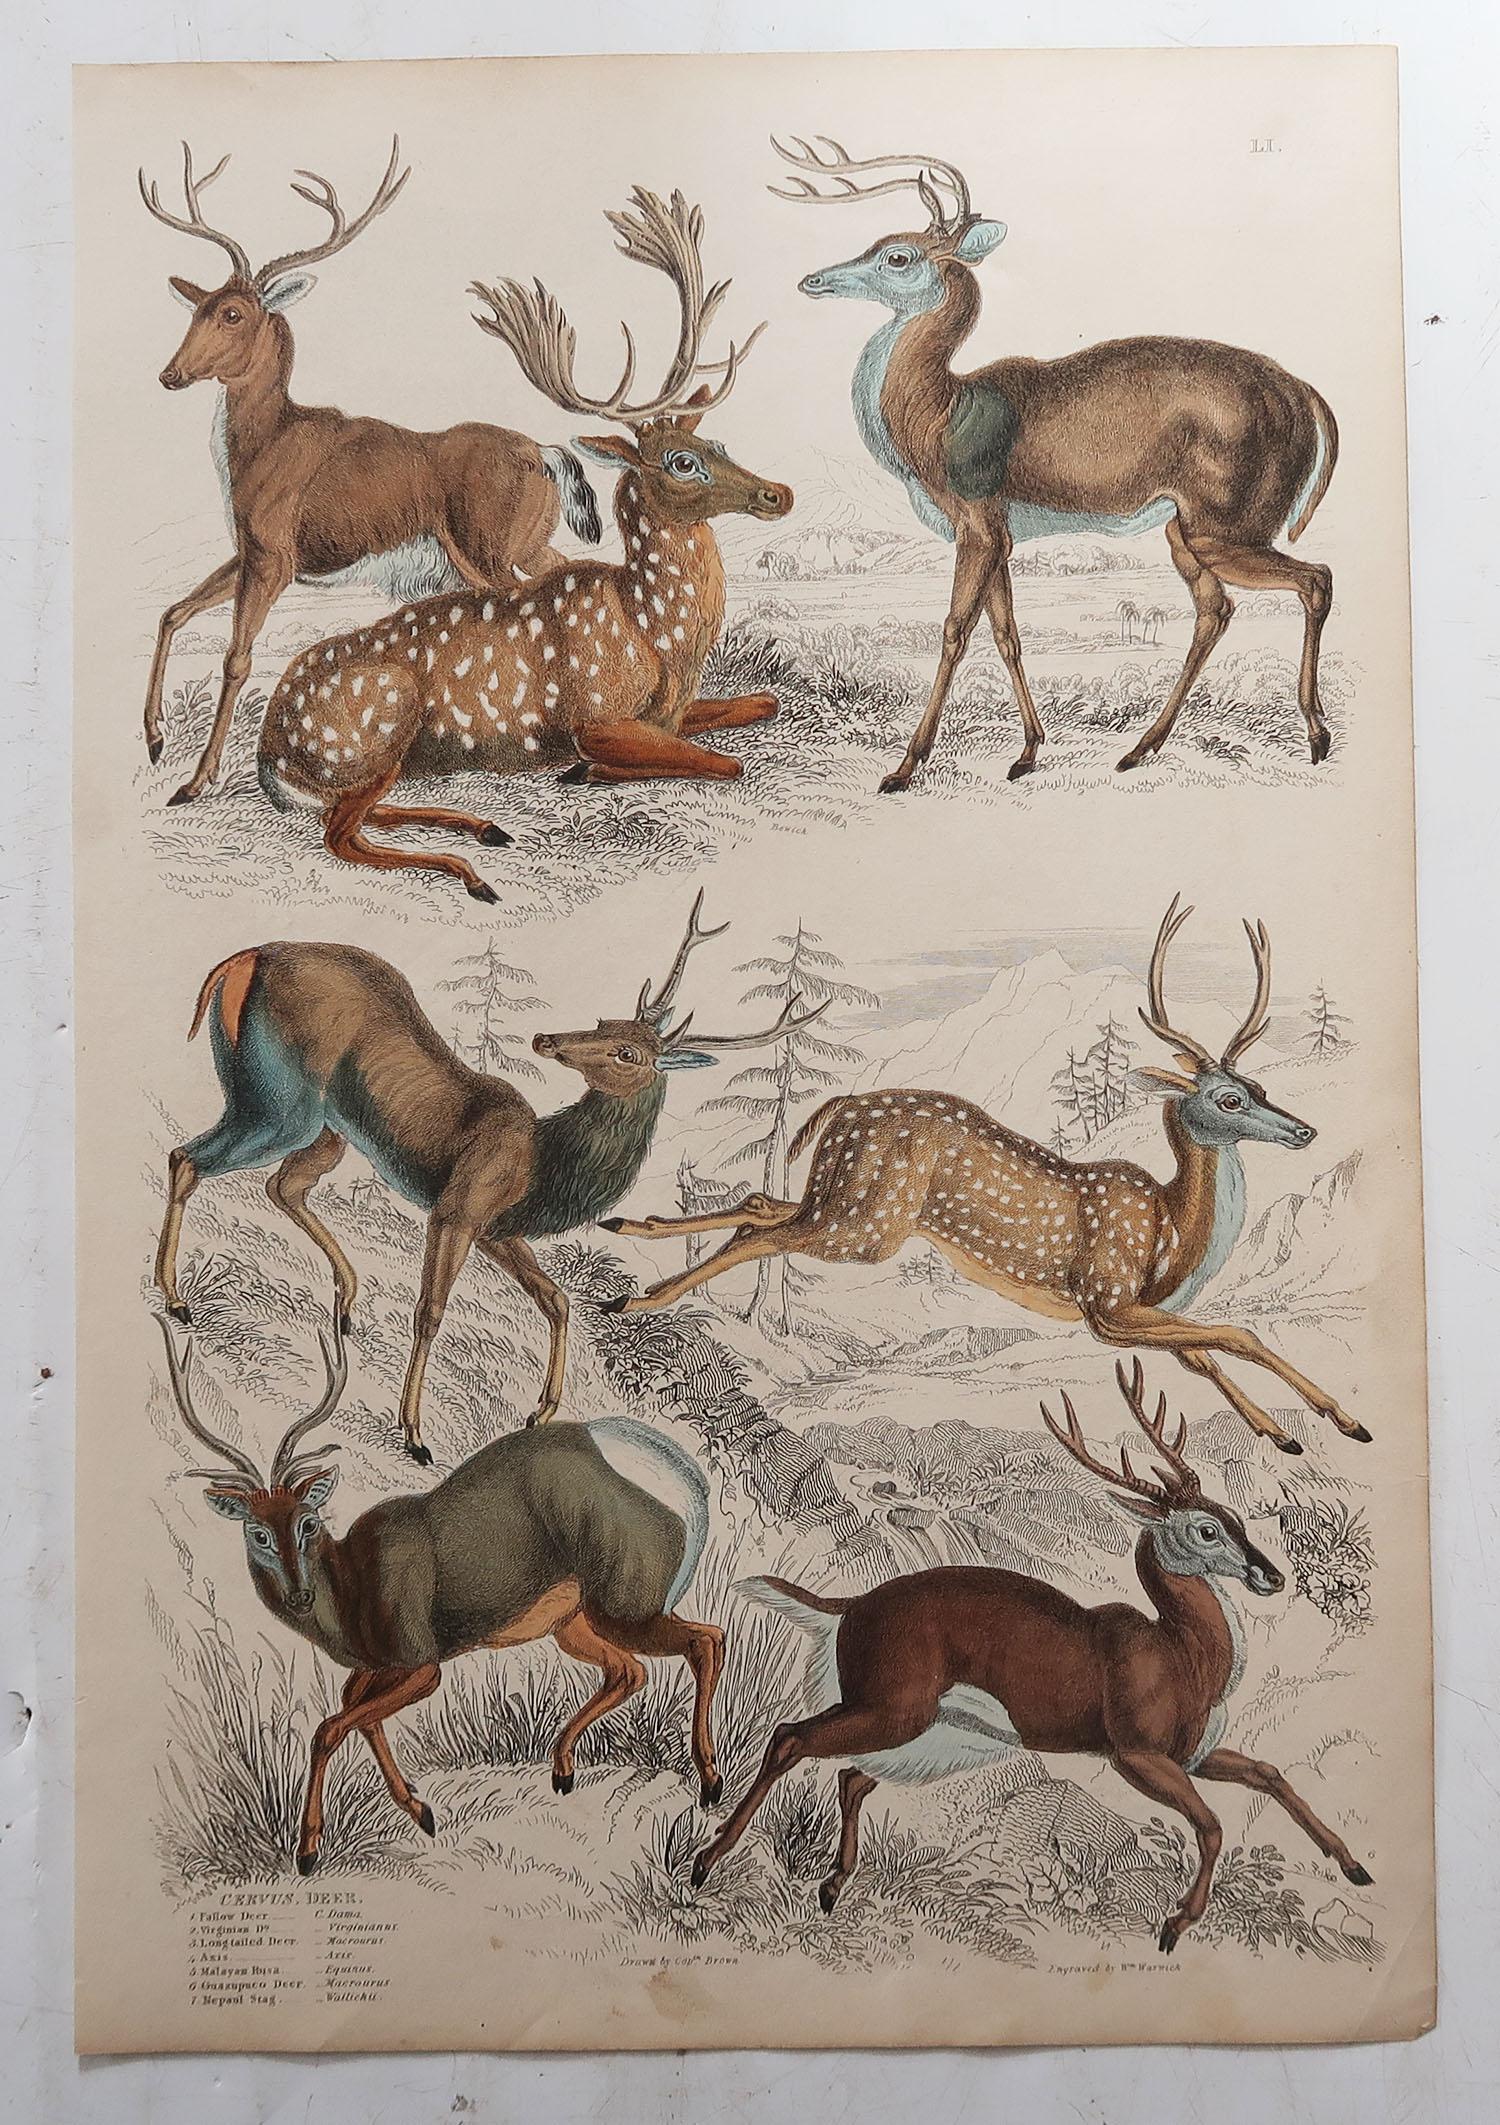 Great set of deer and moose.

Ideal for decorating a ski lodge

Lithographs after the drawings by Cpt. brown.
 
Original color.

Unframed

The measurement given below is for one print.